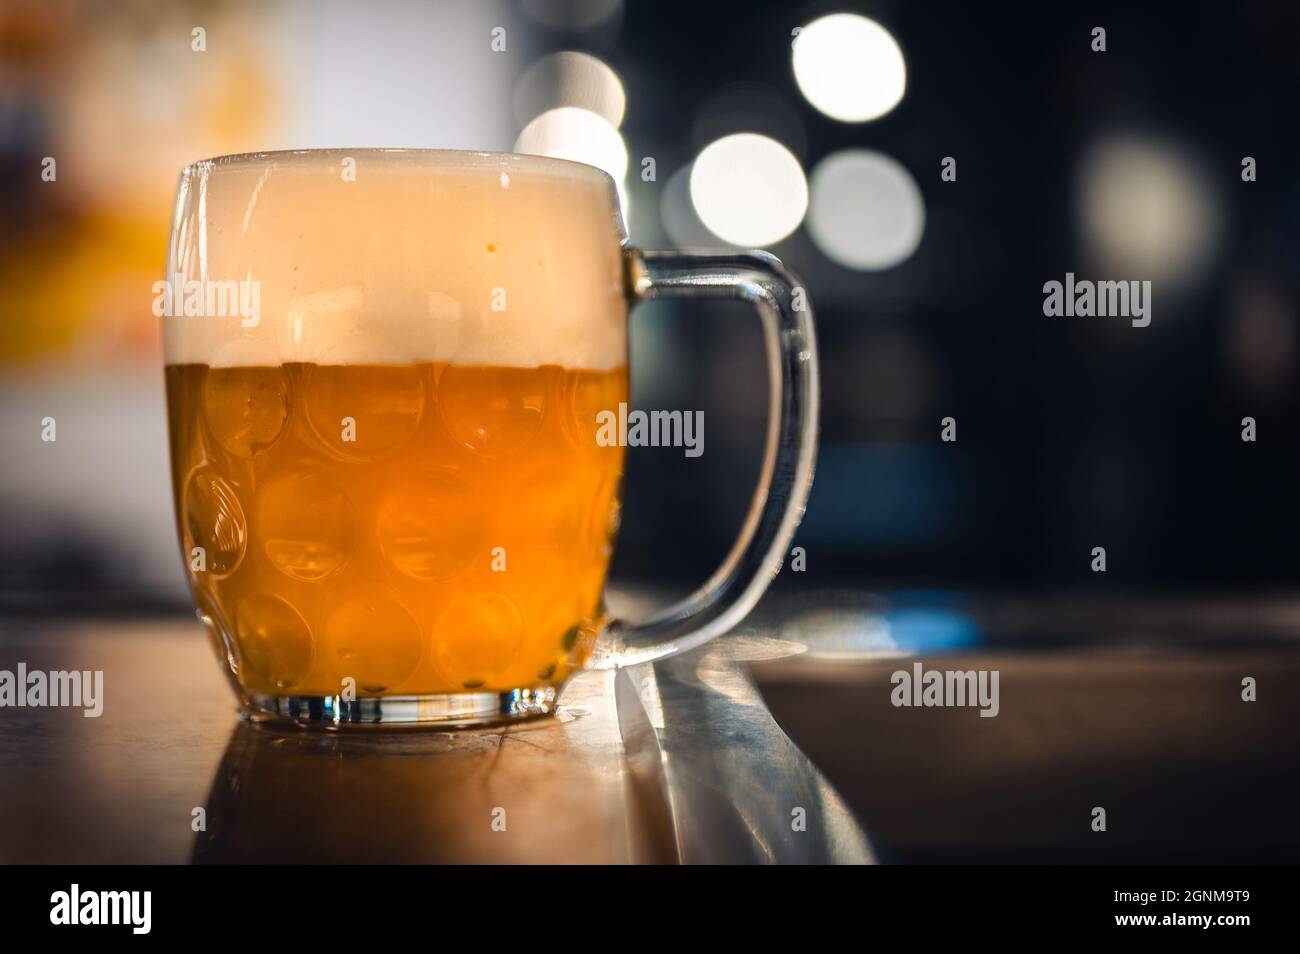 Cold beer glass on a bar or pub desk. Tasty fresh yellow beer of Czech Republic. Dark pub on background. Stock Photo